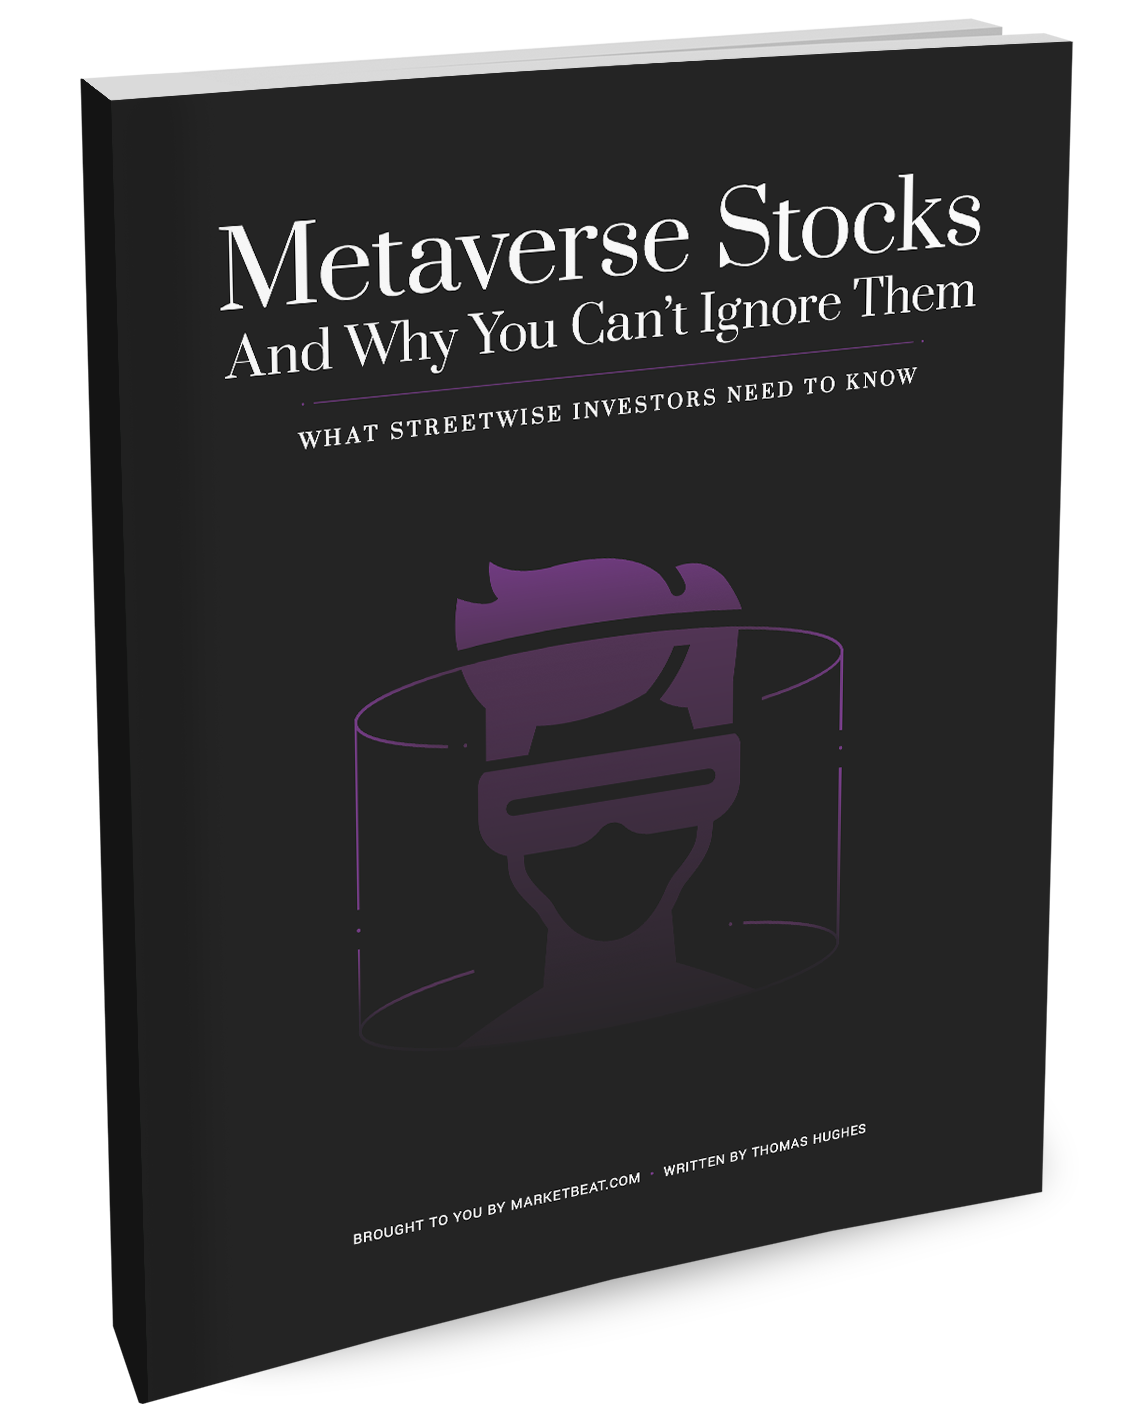 Metaverse Stocks And Why You Can’t Ignore Them